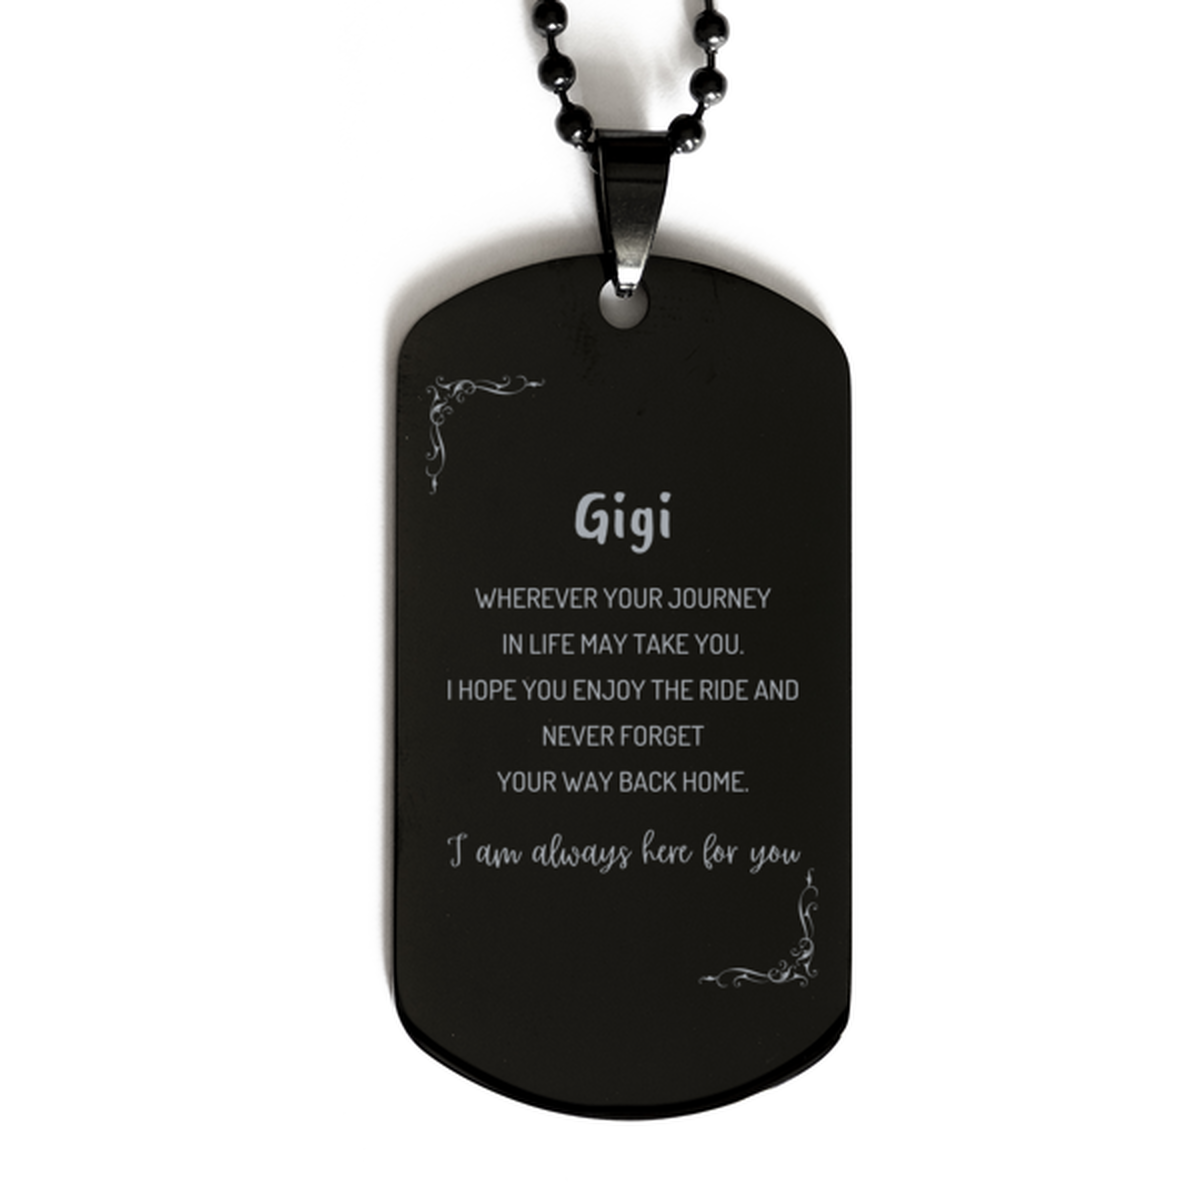 Gigi wherever your journey in life may take you, I am always here for you Gigi Black Dog Tag, Awesome Christmas Gifts For Gigi, Gigi Birthday Gifts for Men Women Family Loved One